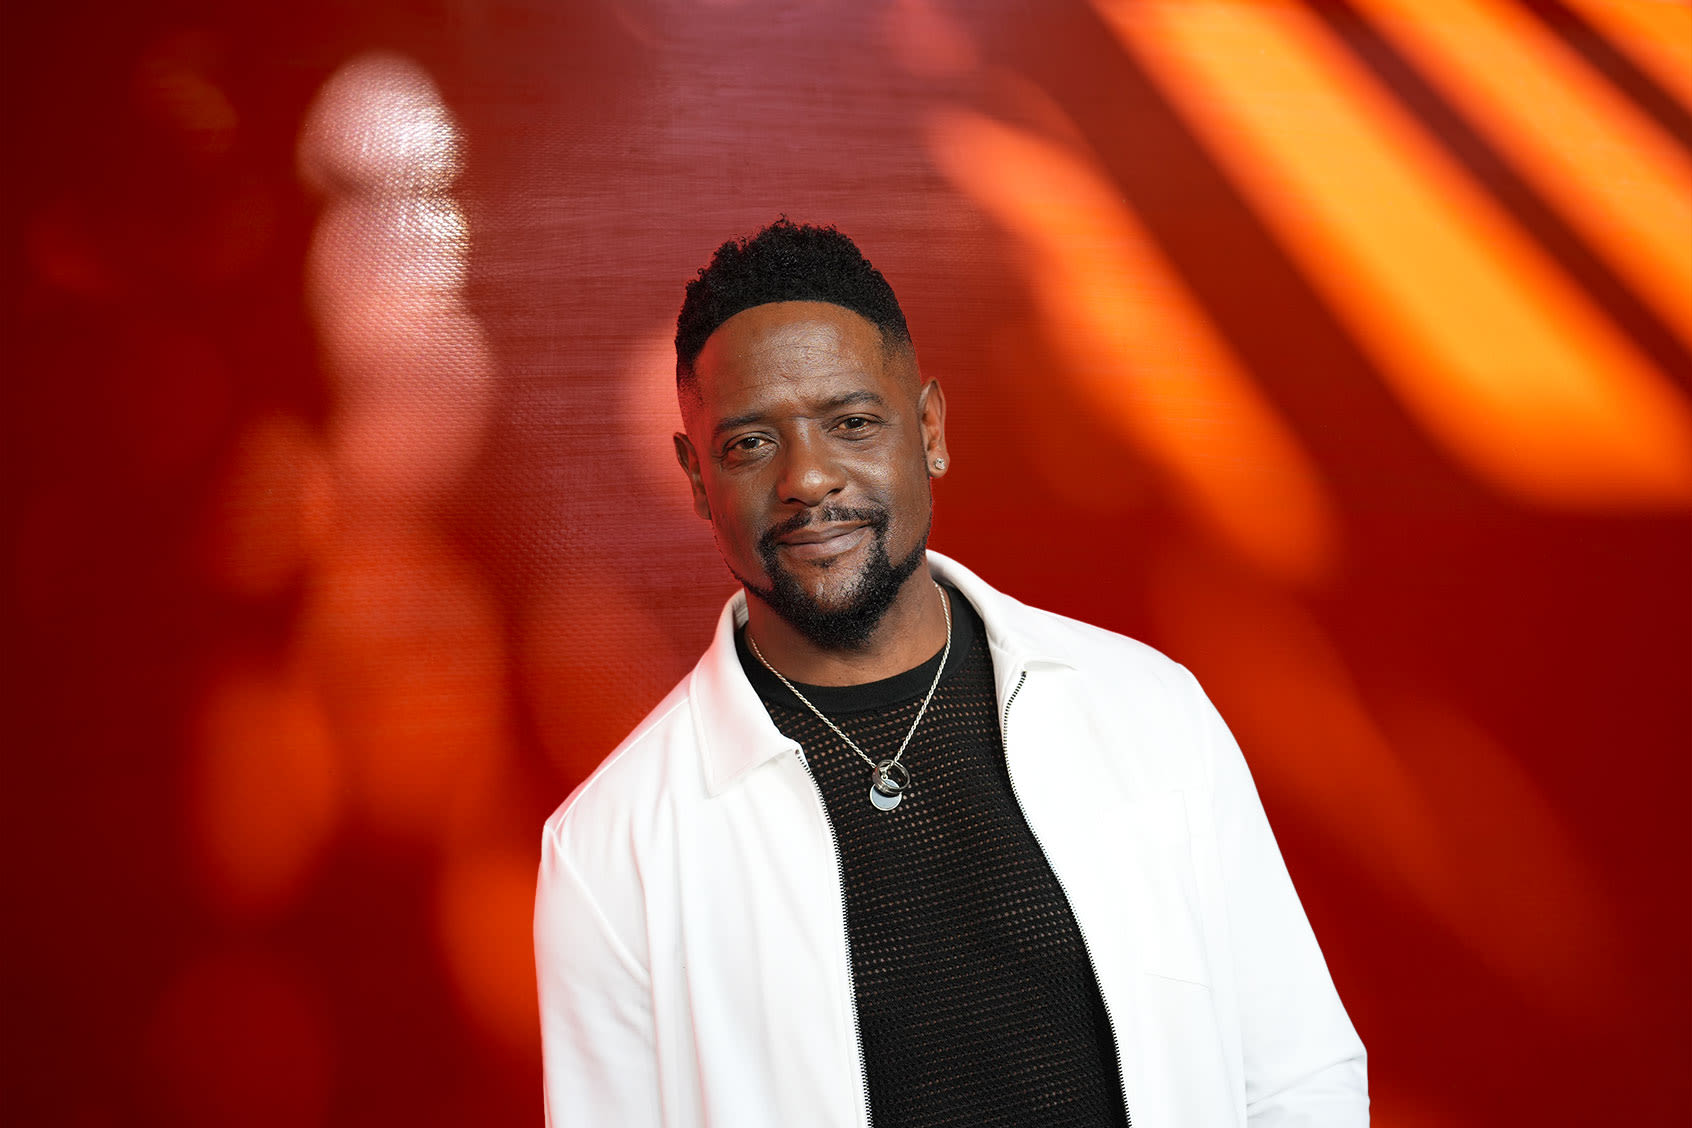 "This is some creepy stuff": Blair Underwood on starring in "Longlegs" with Nicolas Cage